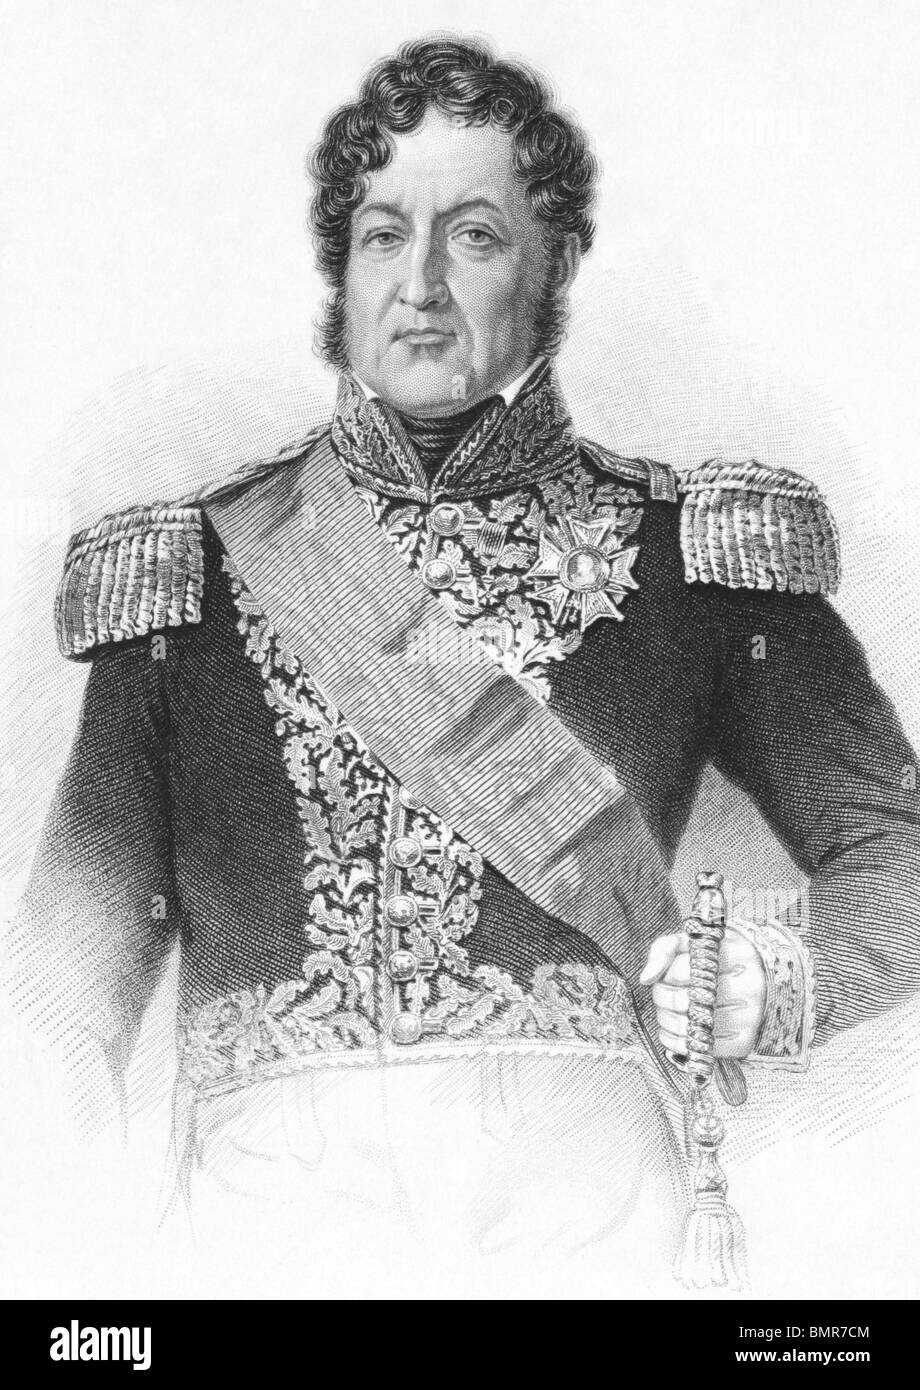 Louis Philippe (1773-1850) on engraving from the 1800s. King of the French during 1830-1848. Stock Photo